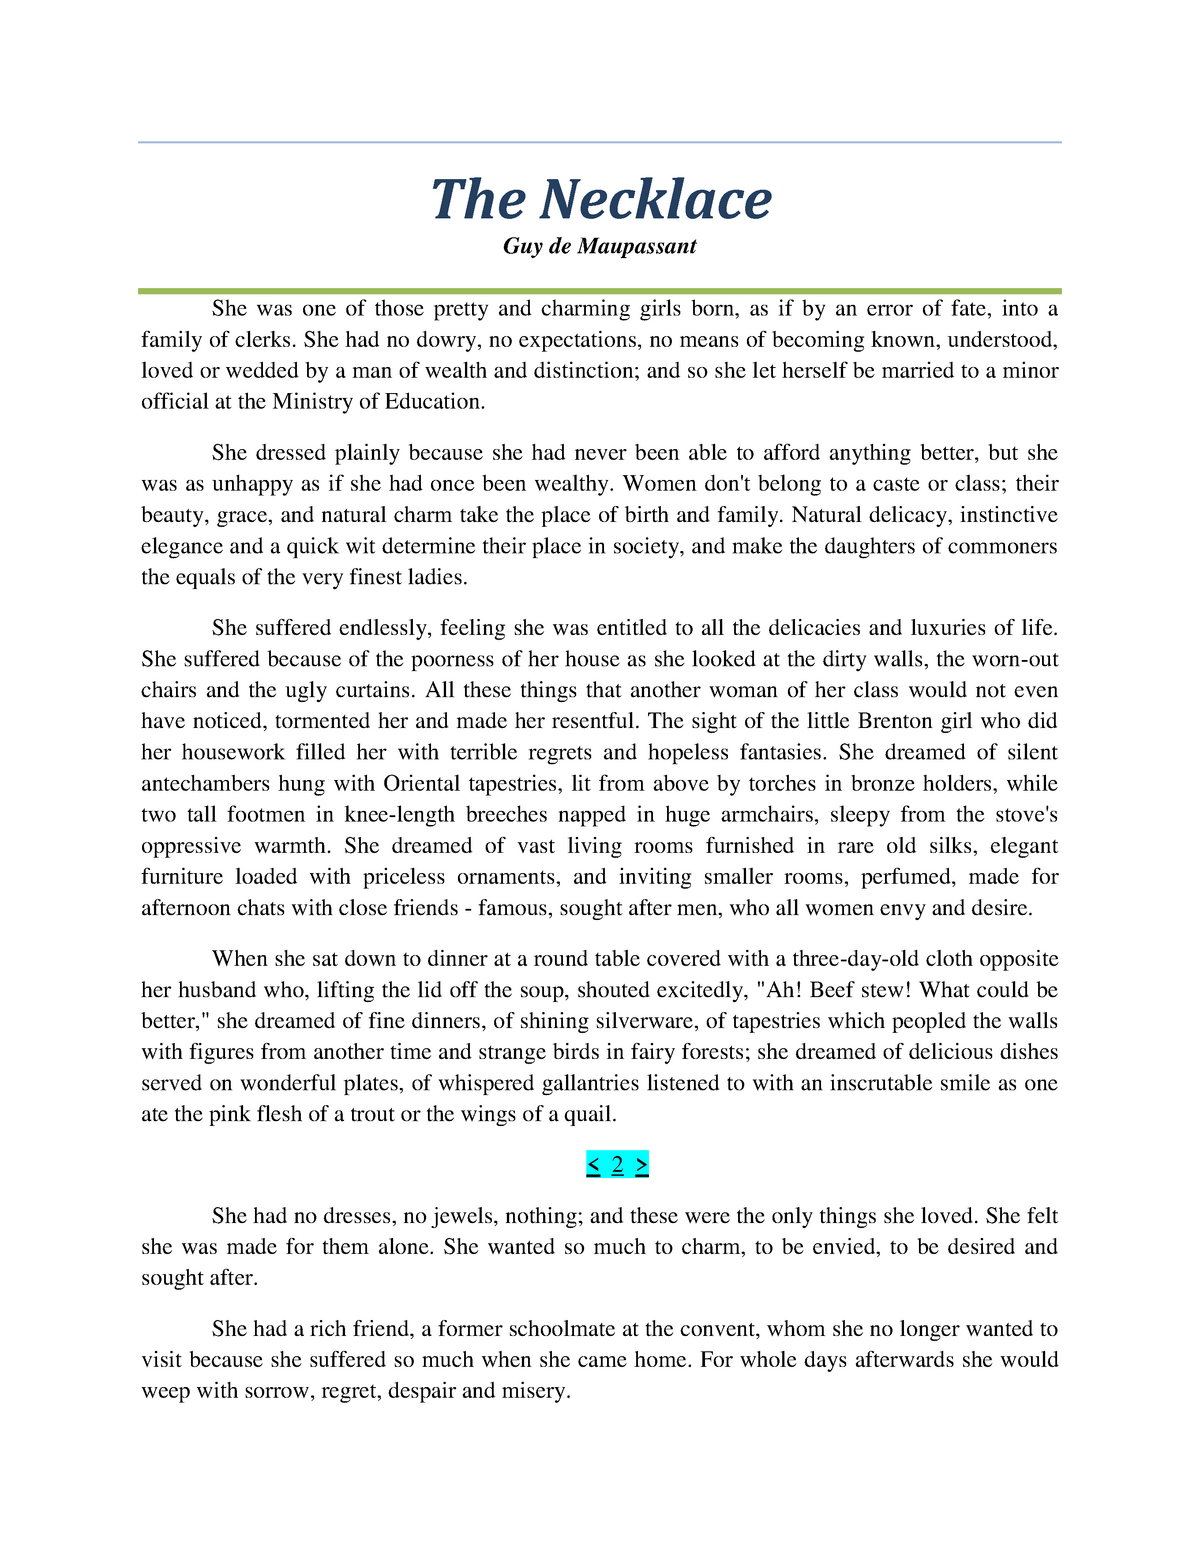 The Necklace by Guy de Maupassant Essay Example | Topics and Well Written  Essays - 750 words